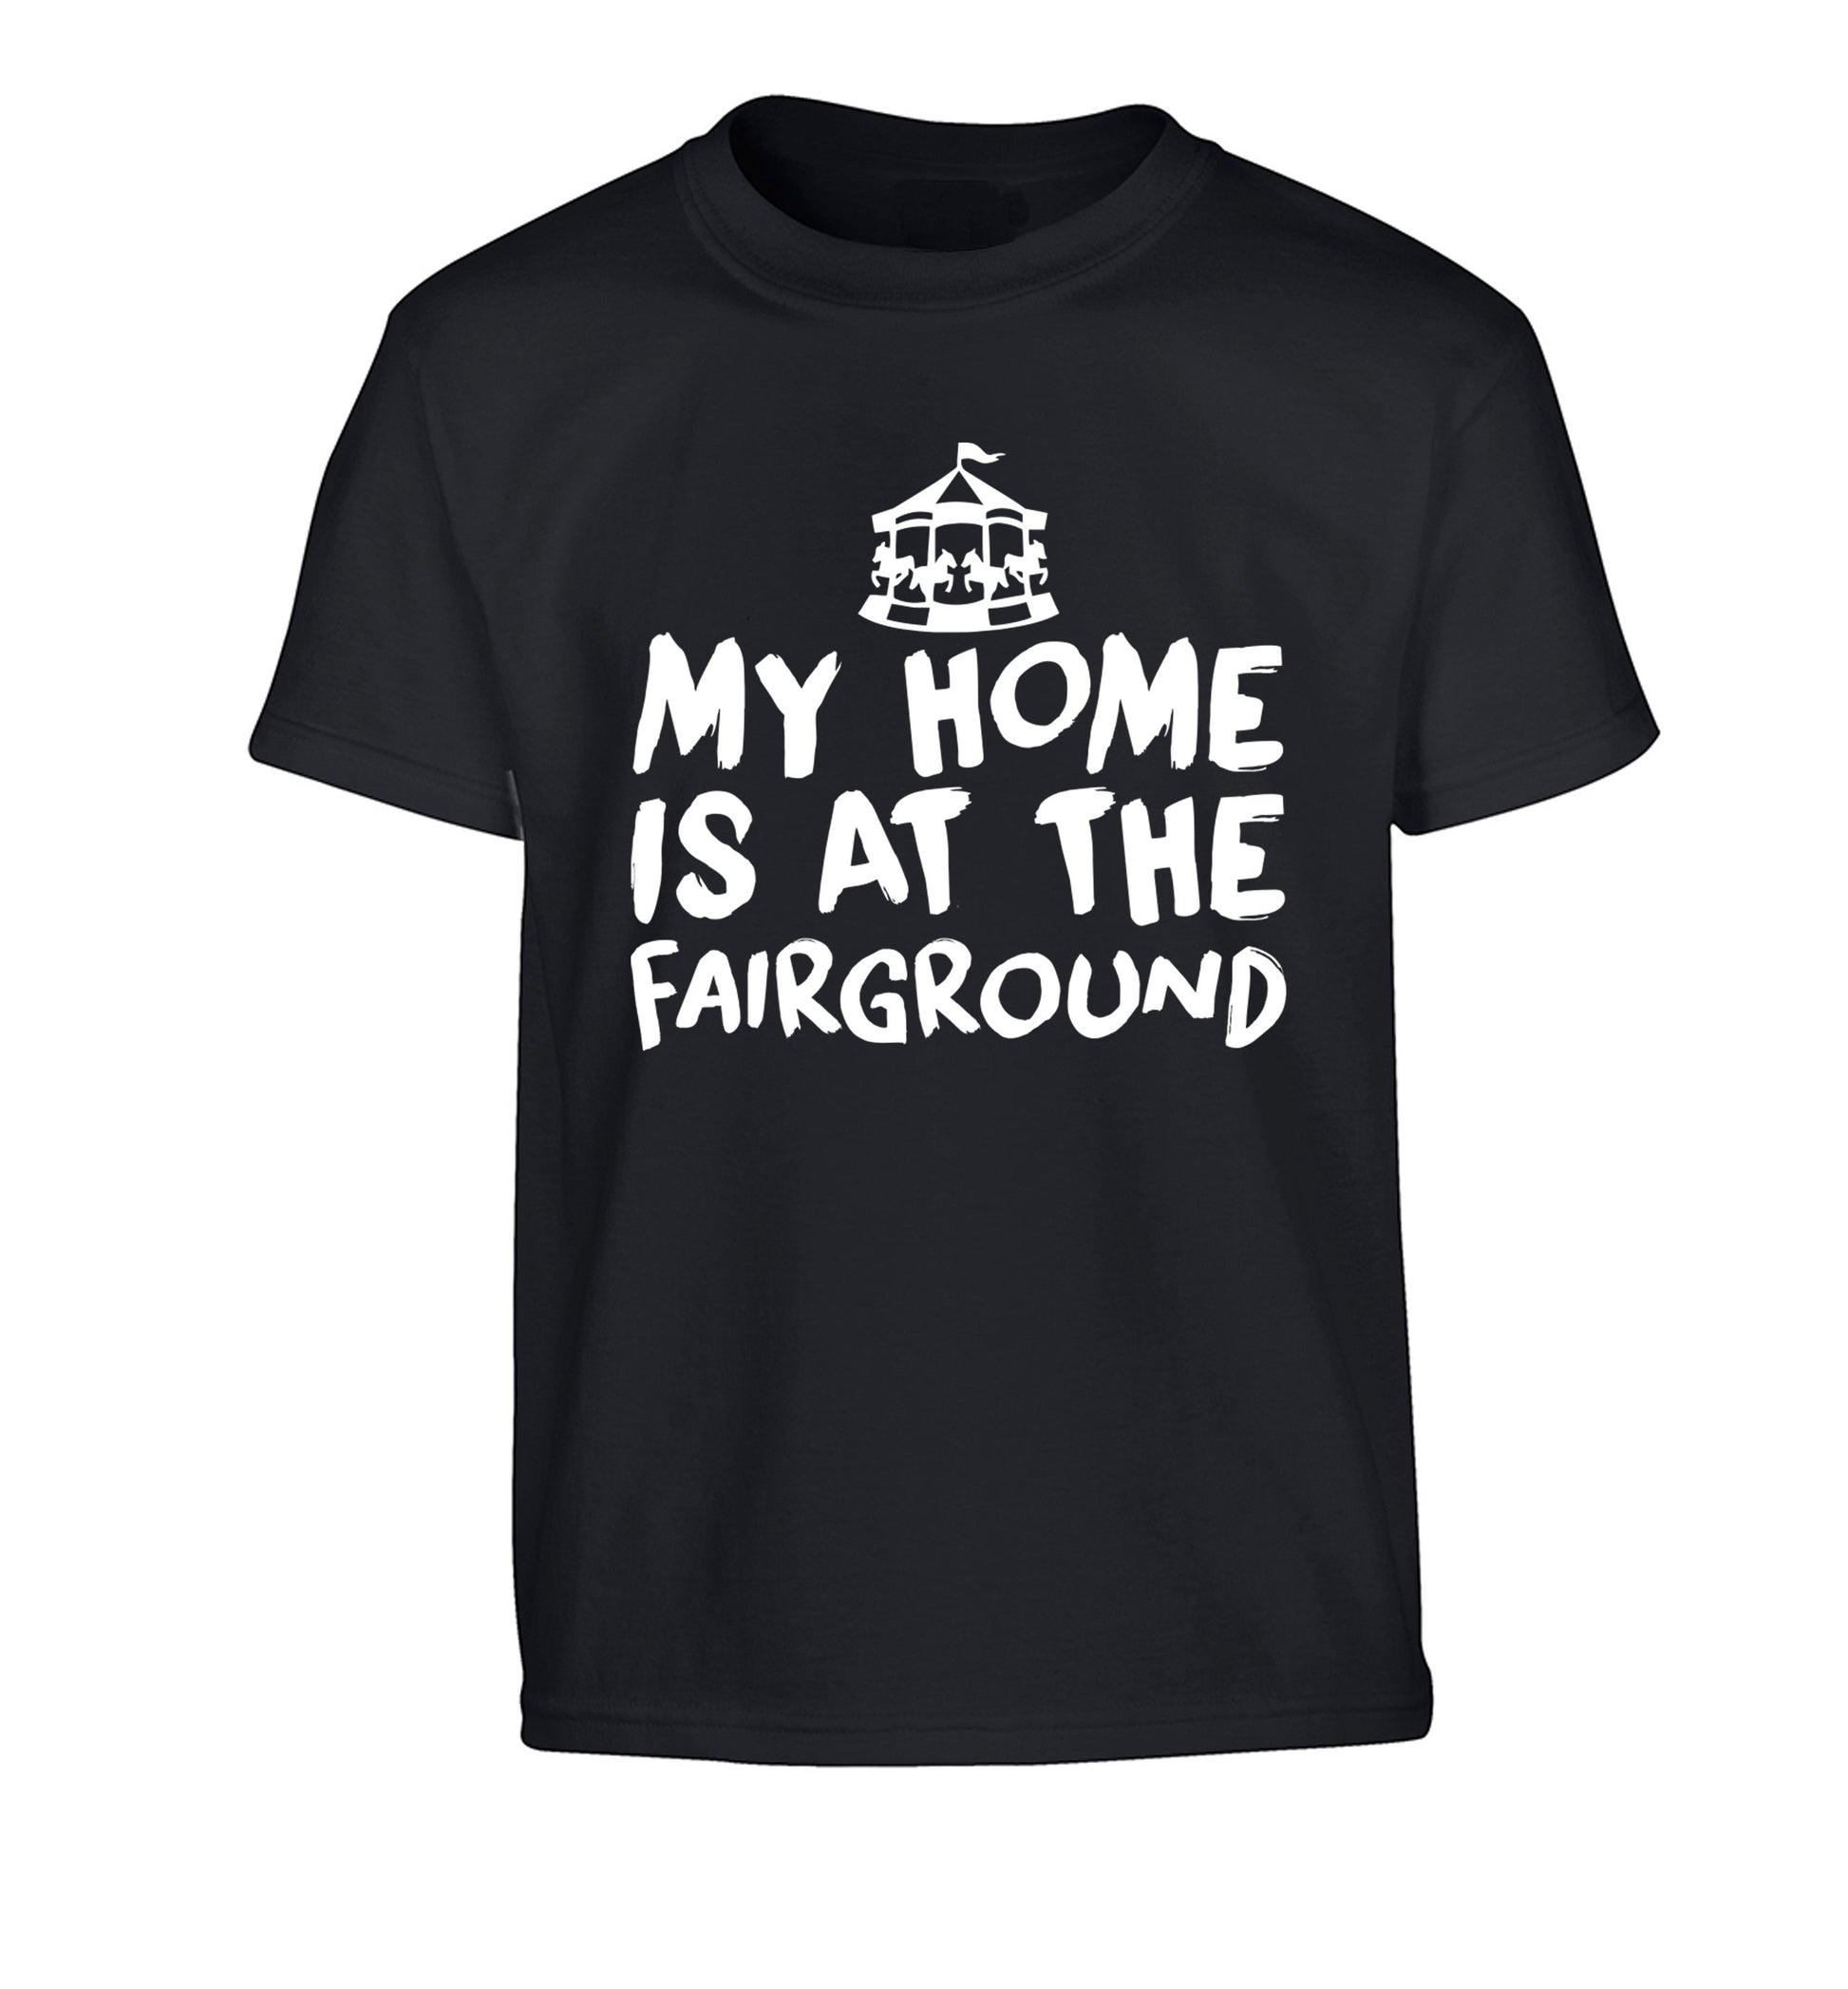 My home is at the fairground Children's black Tshirt 12-14 Years